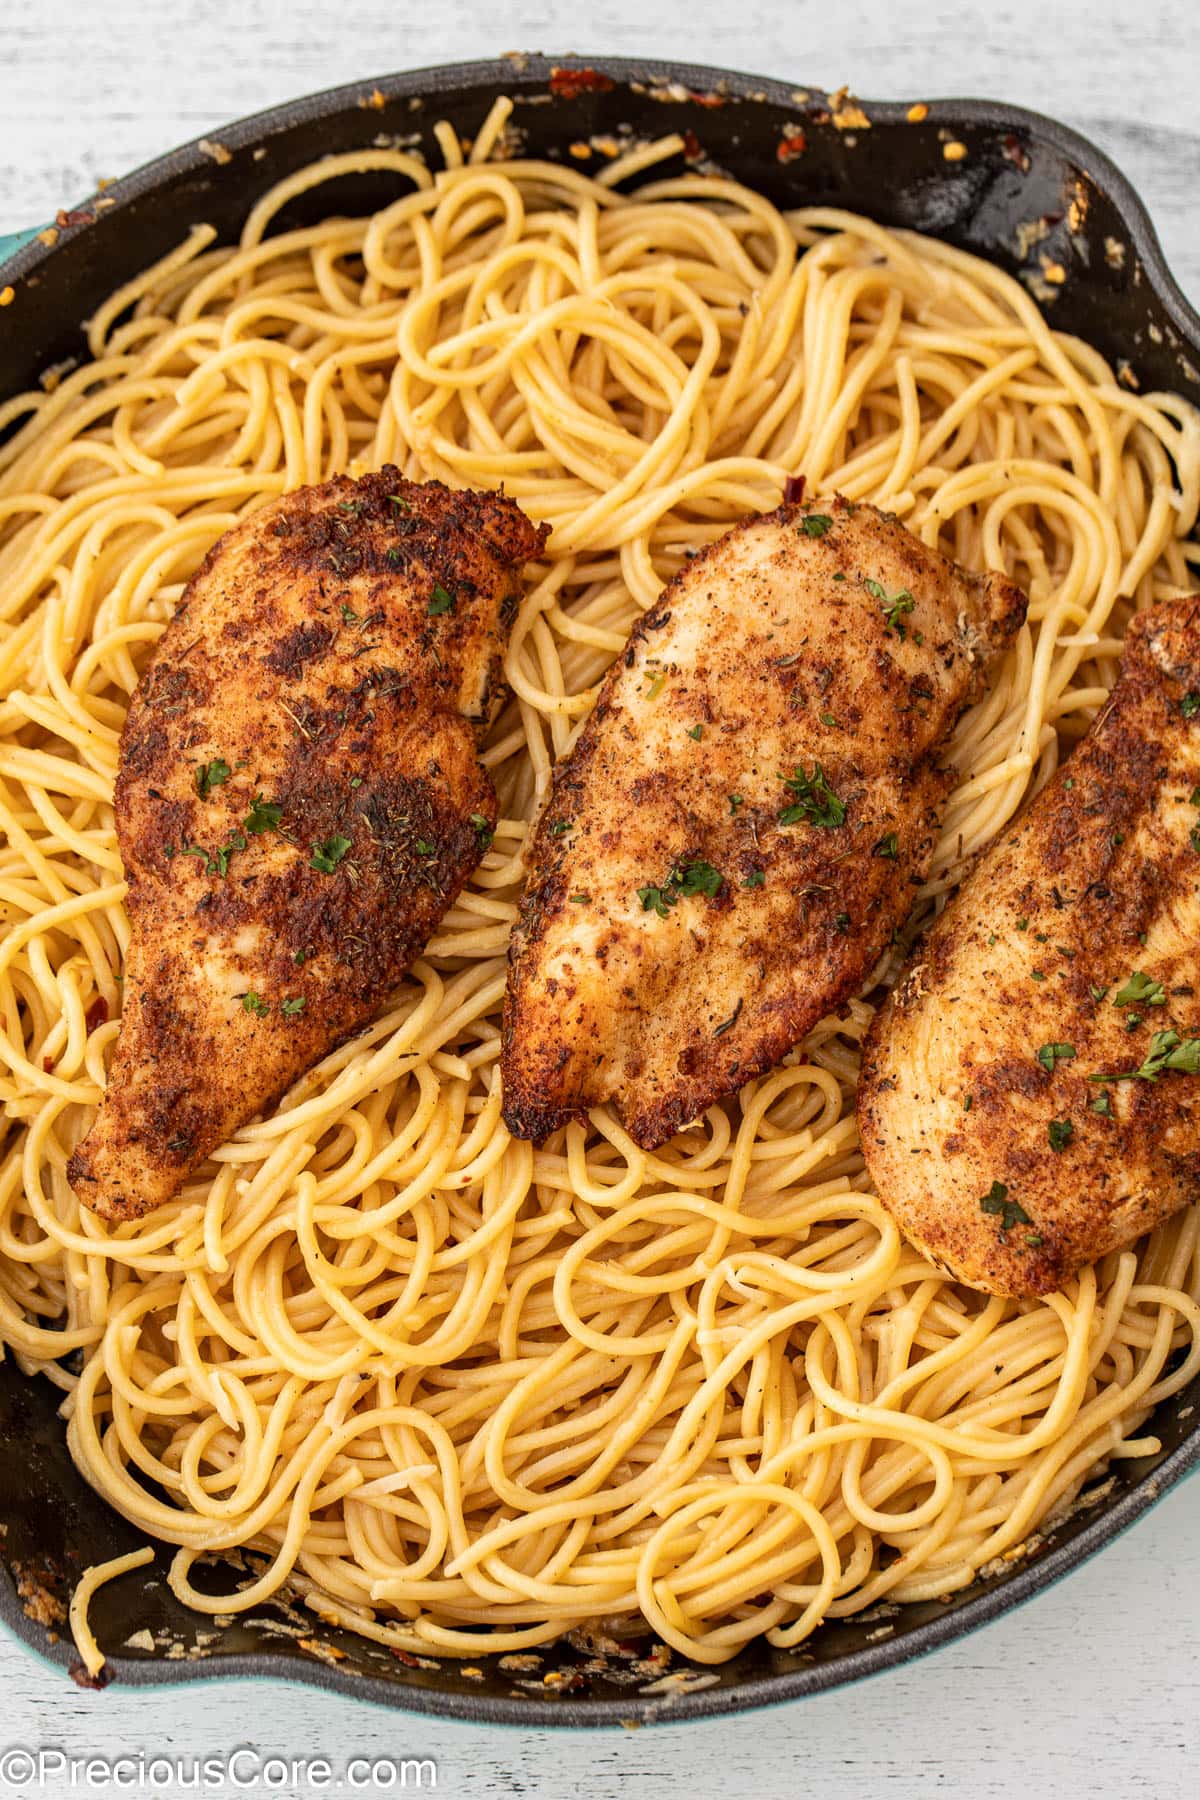 A skillet of garlic butter spaghetti topped with chicken.